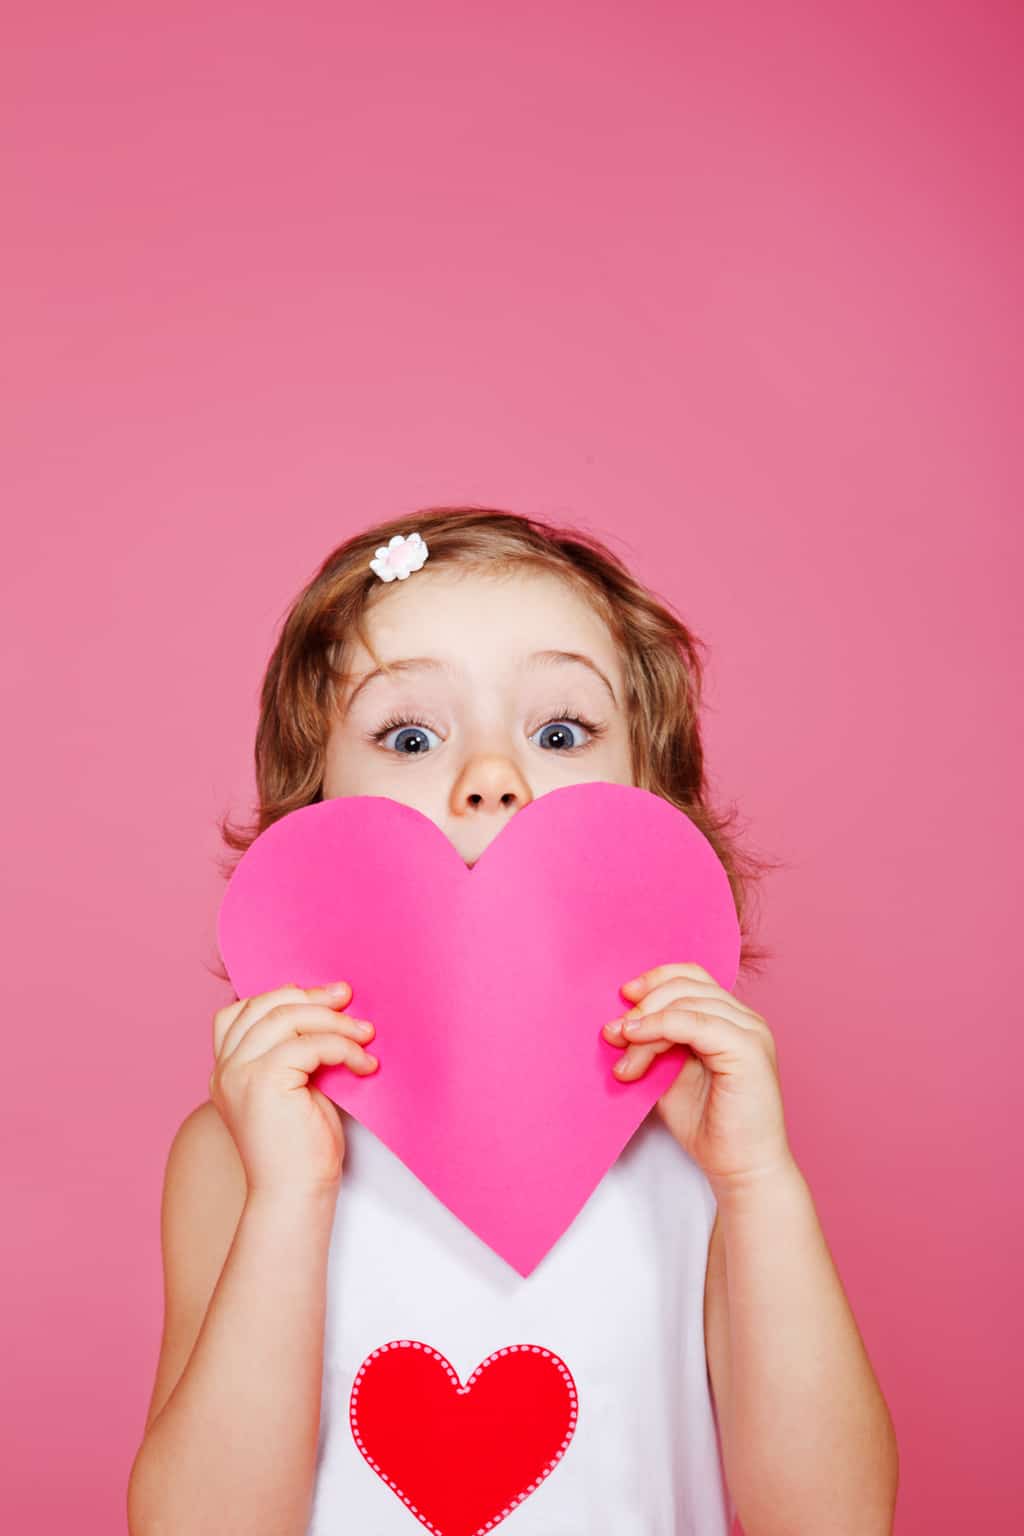 Socially Distanced Valentine Activities for Kids